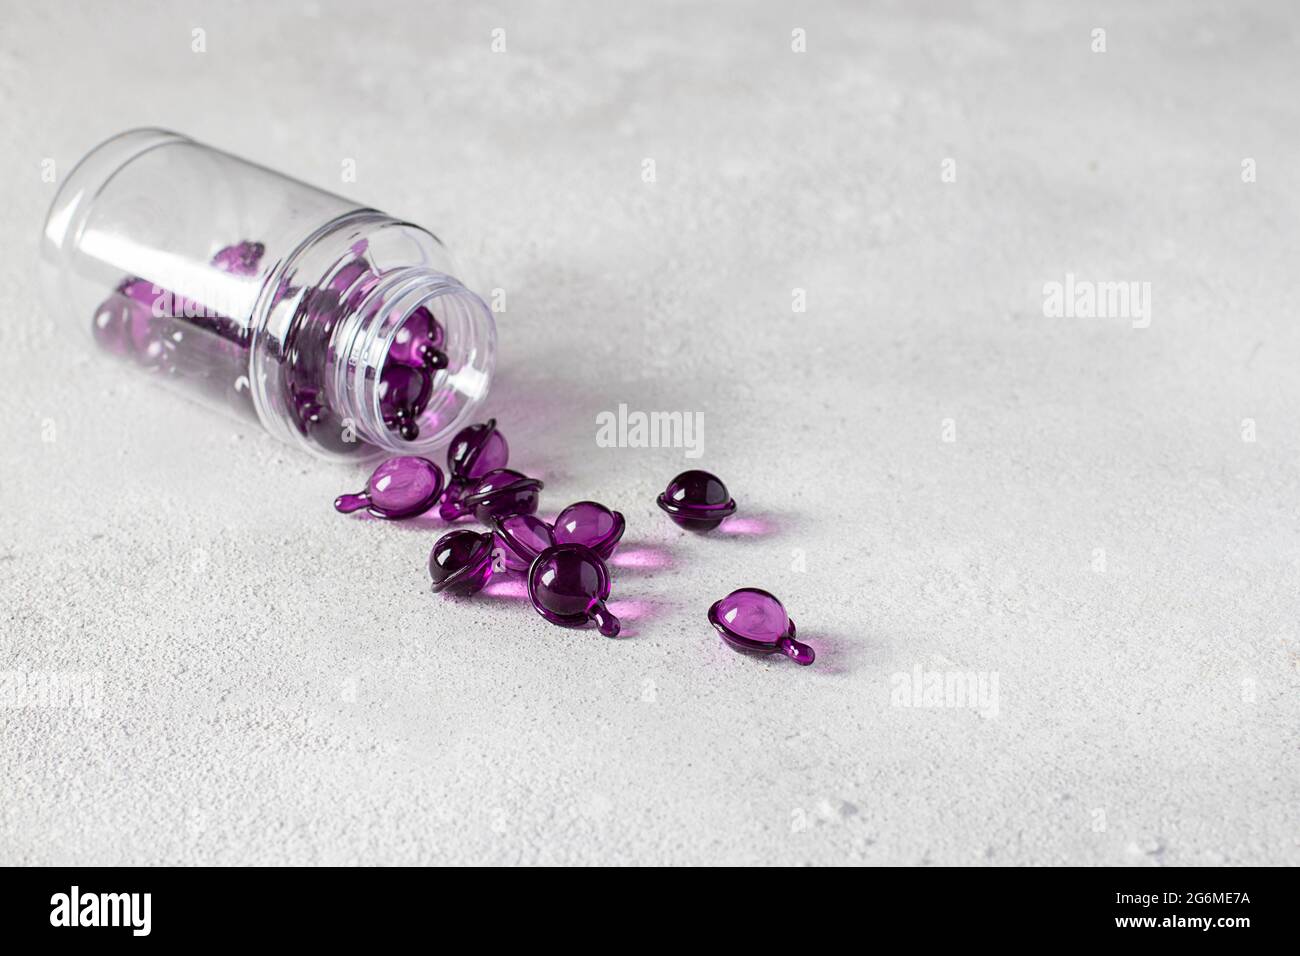 Hair Vitamin Capsules Pour Out of the Bottle on a Gray Background: Hair Treatment and Care Products With Oil for Damaged, Highlighted, Permed and Colo Stock Photo